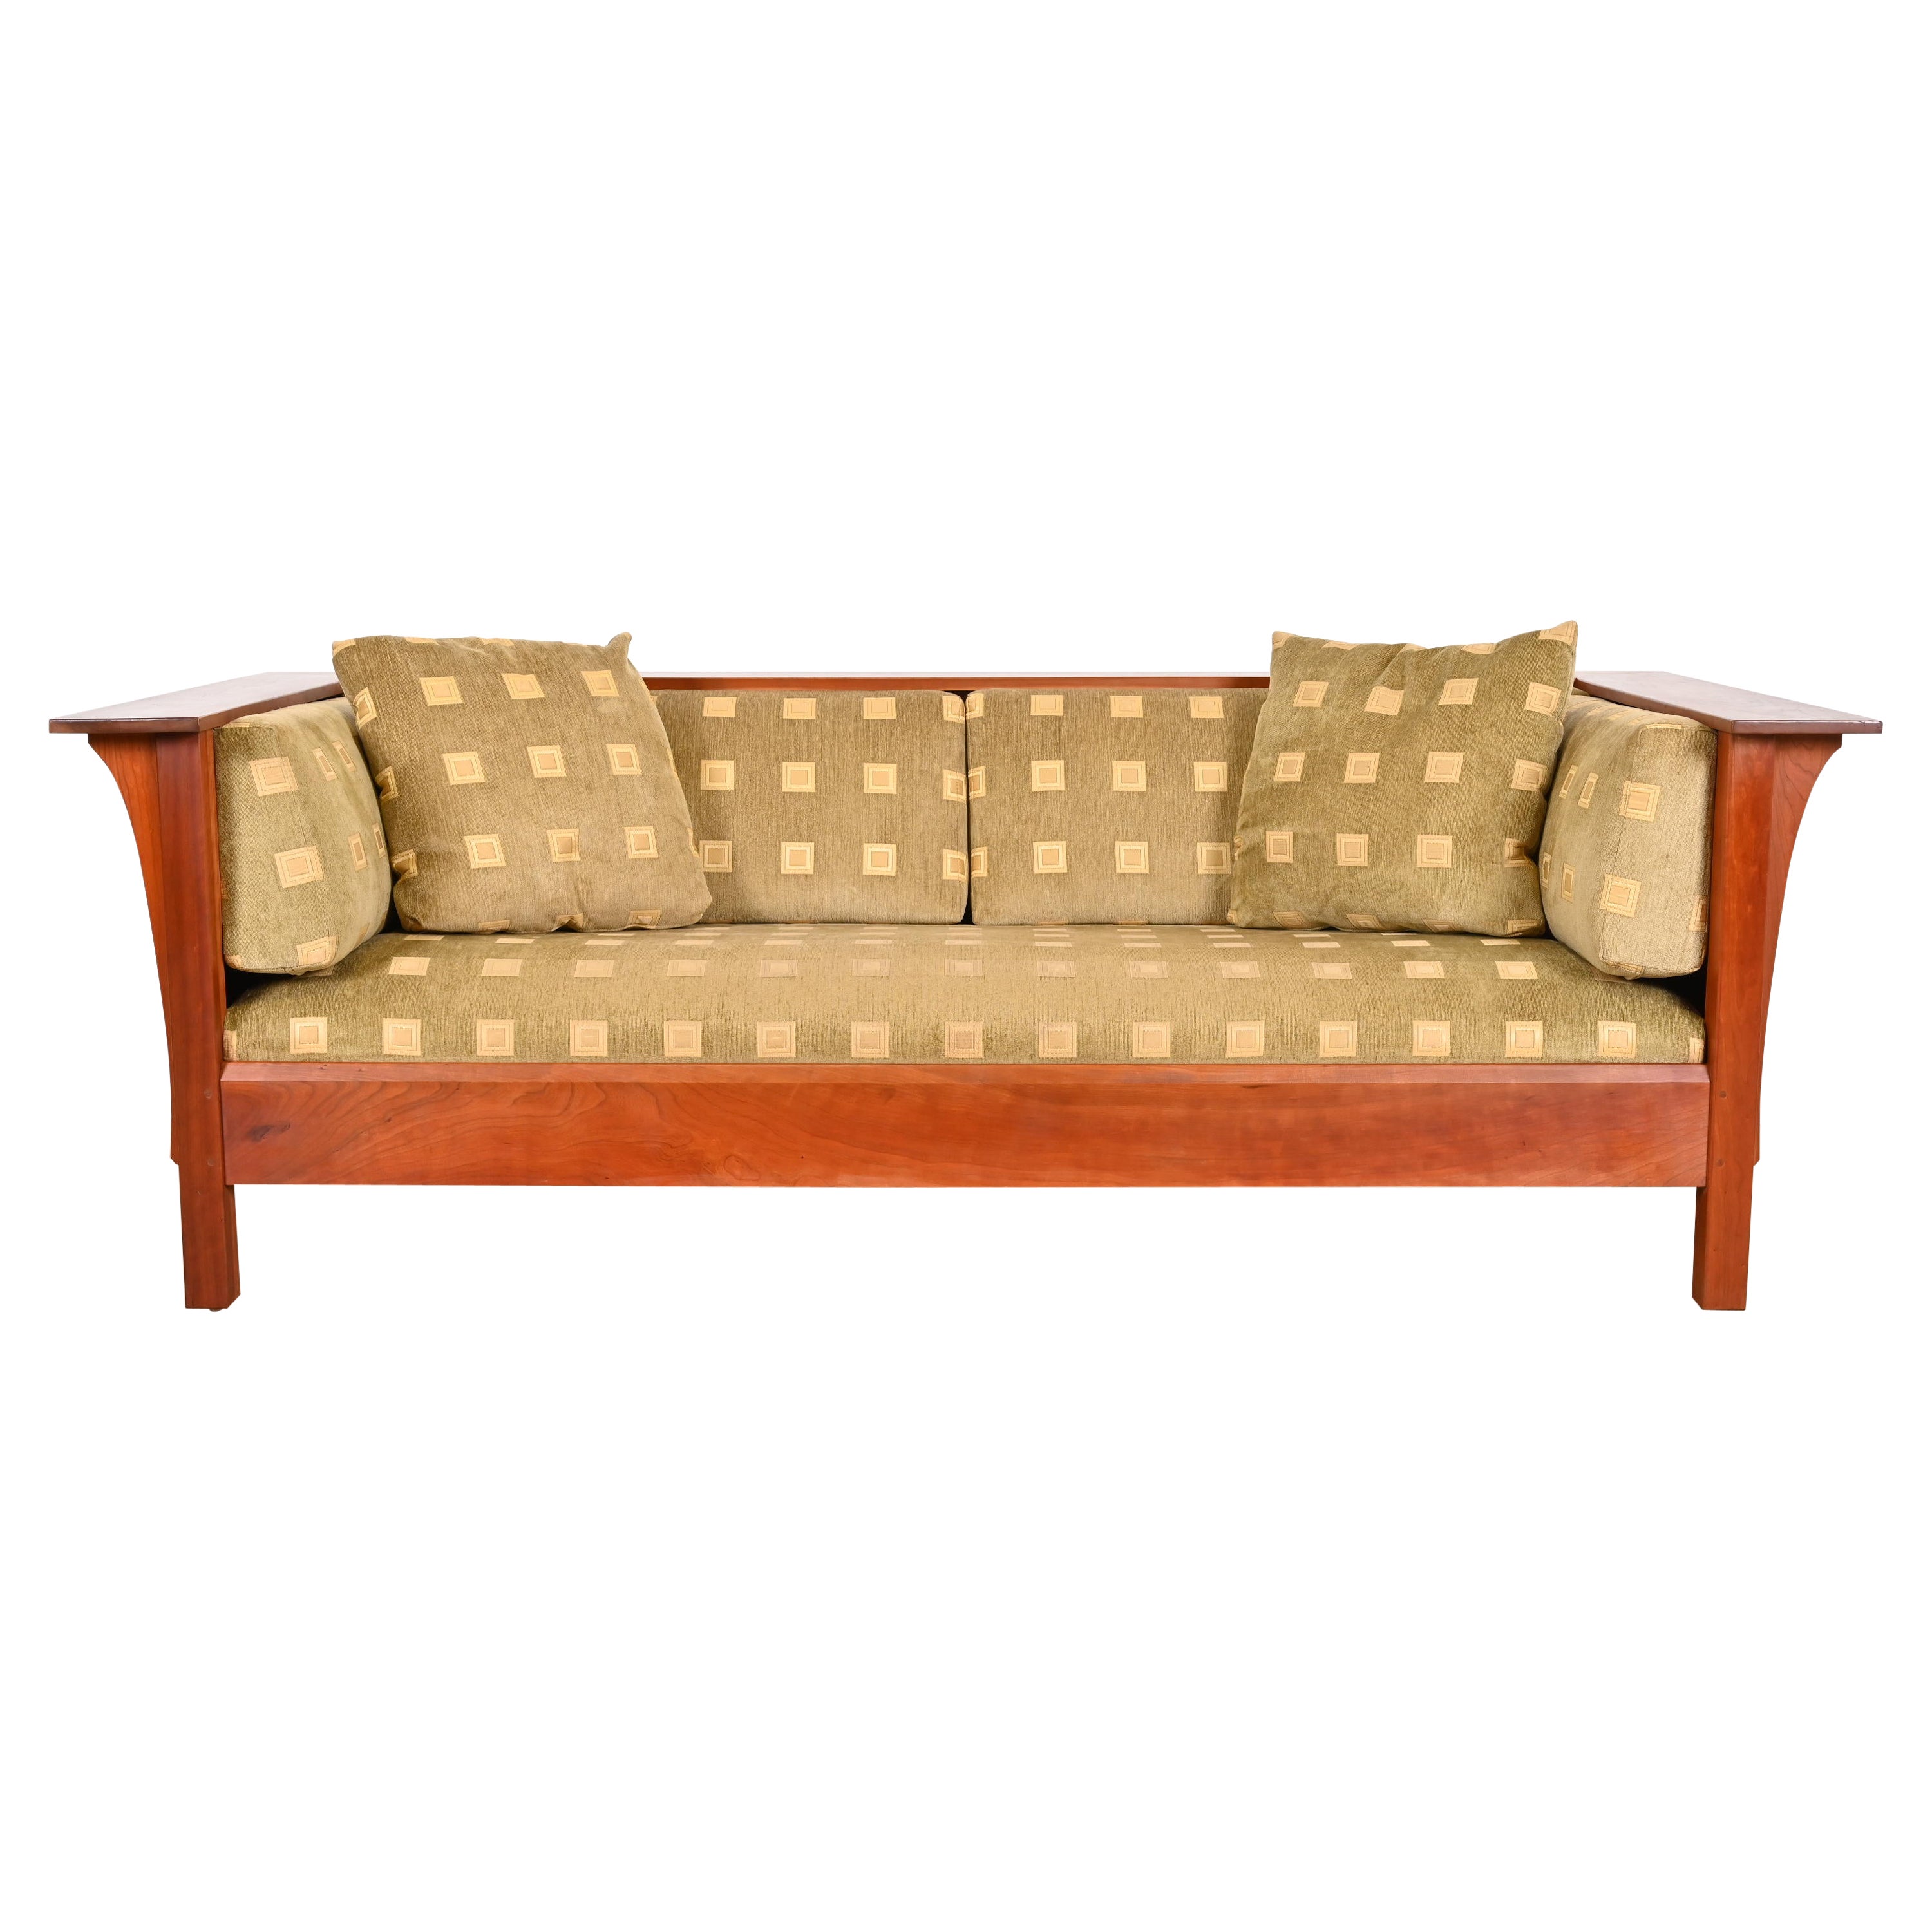 Stickley Mission Arts and Crafts Cherry Wood Settle Sofa